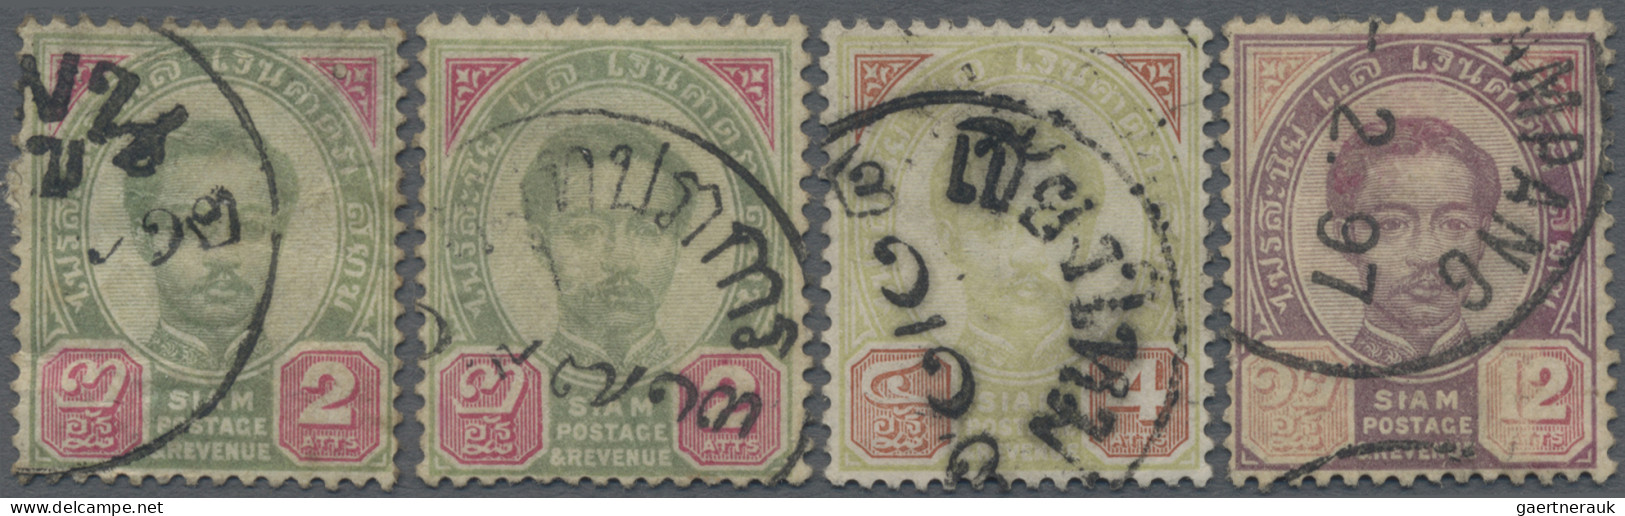 Thailand - Post Marks: 1887 Four Stamps With Scarce Postmarks, I.e. 2a. With LAM - Thaïlande